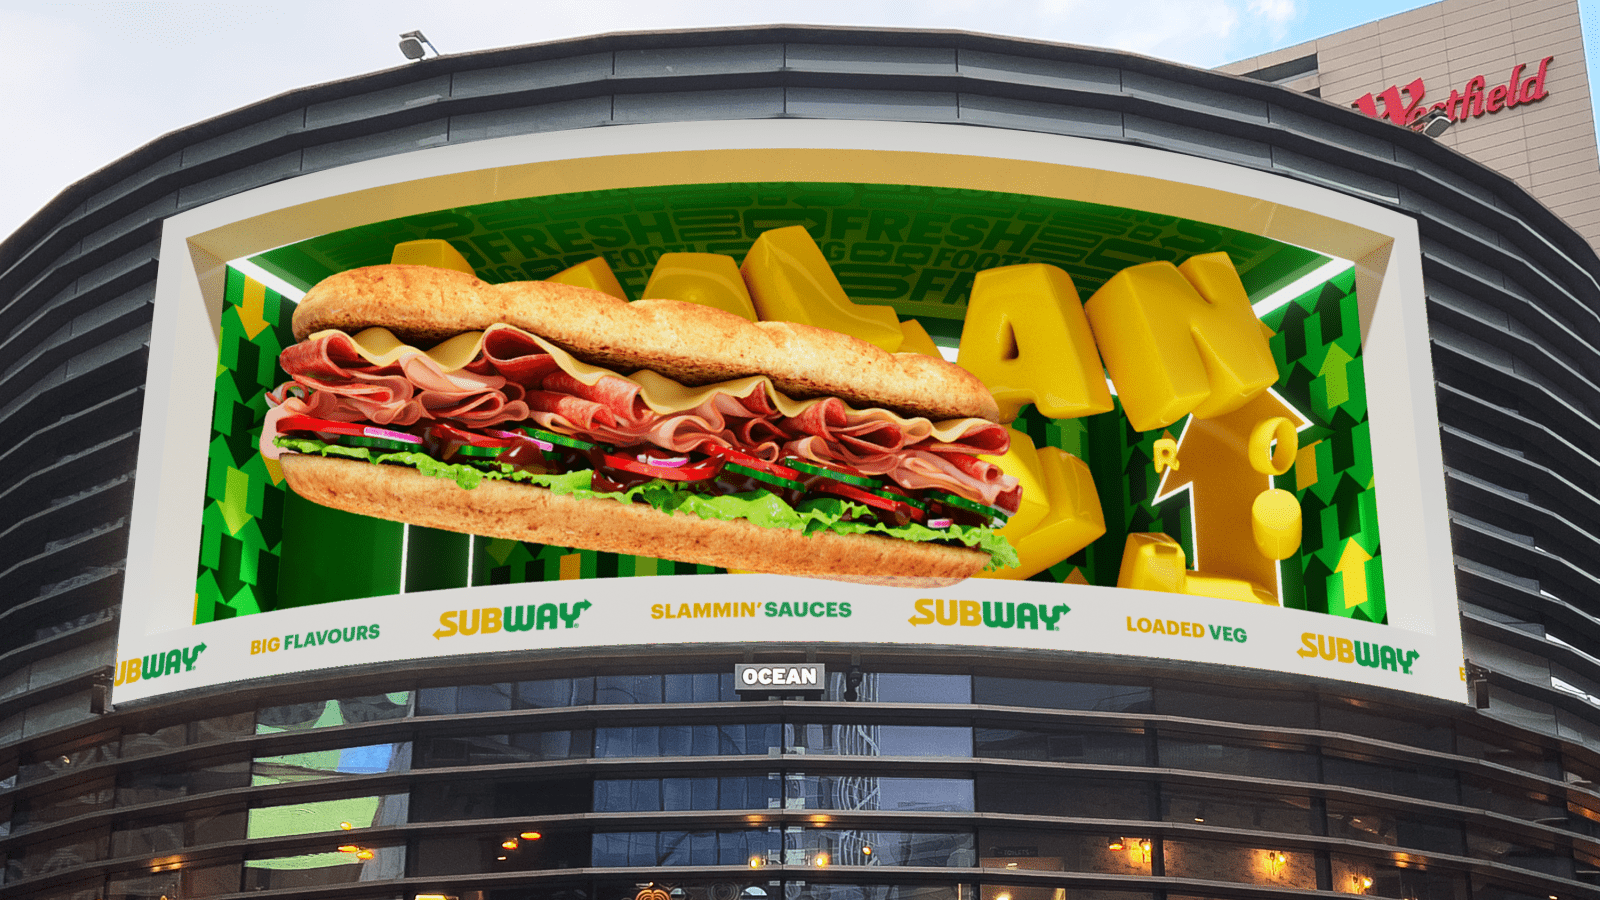 Go Big, Go Subway – The World’s first fully interactive 3D billboard